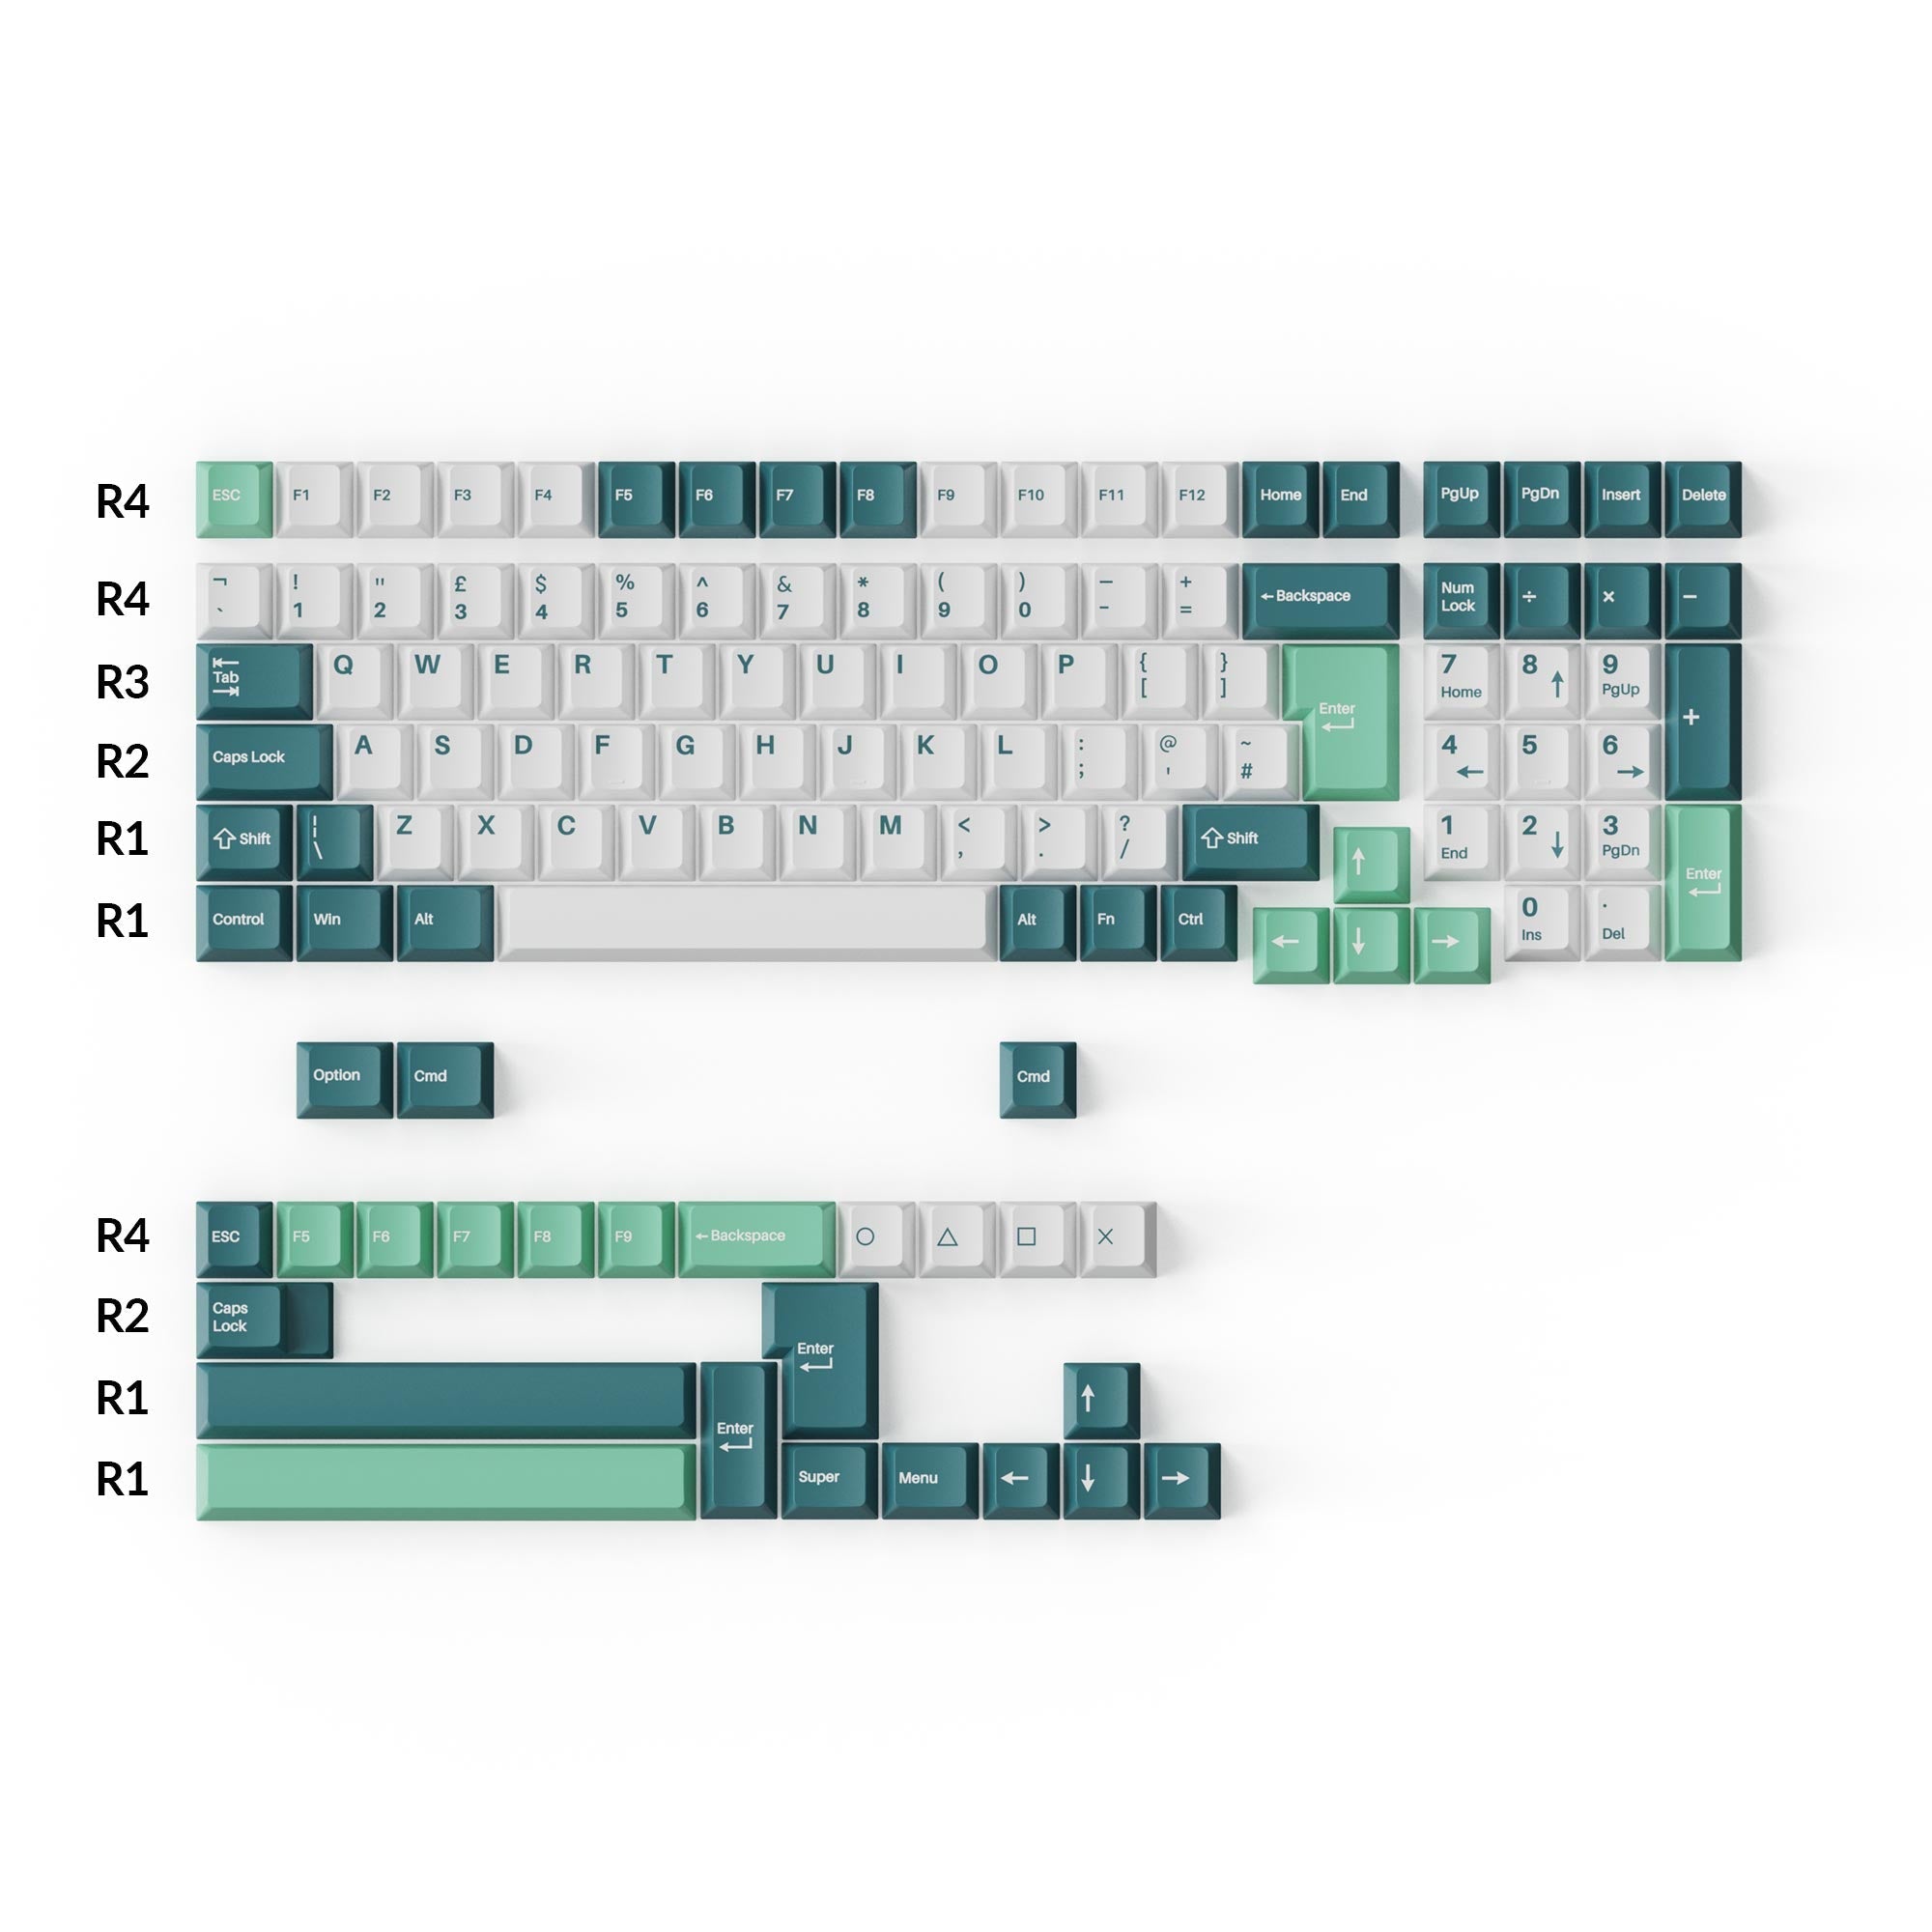 Keychron double shot PBT Cherry profile full set keycap set white mint for UK ISO 96% and 75% and 65% layouts